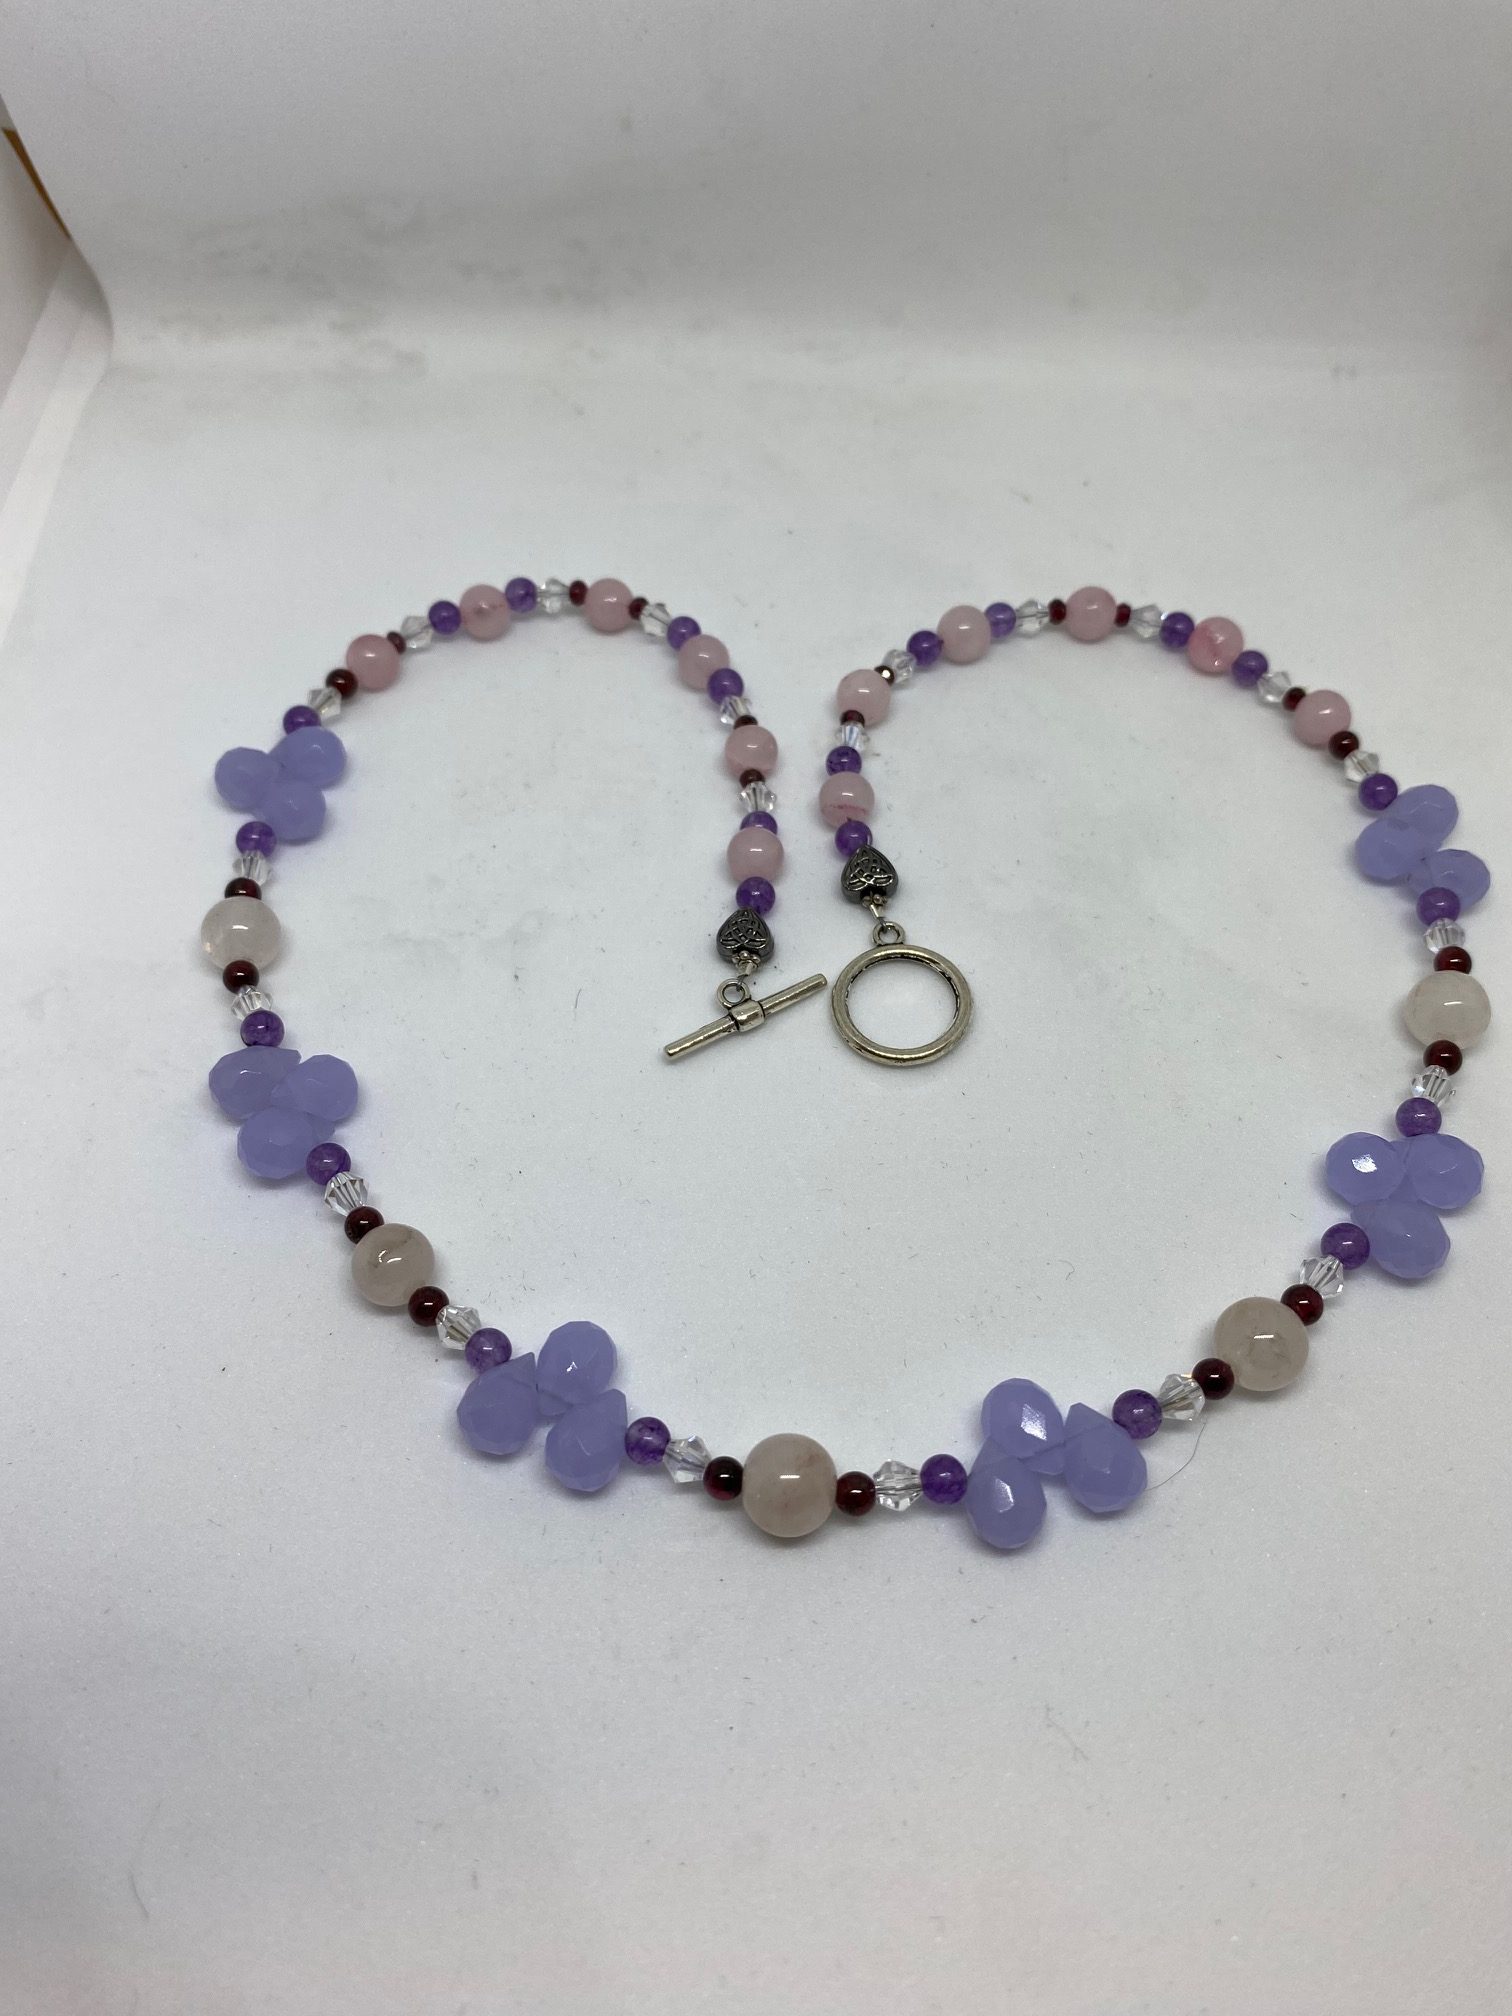 Violet Chalcedony, Rose Quartz, Amethyst, and Garnet Necklace This necklace promotes emotional stability, prosperity, and divine connection. 